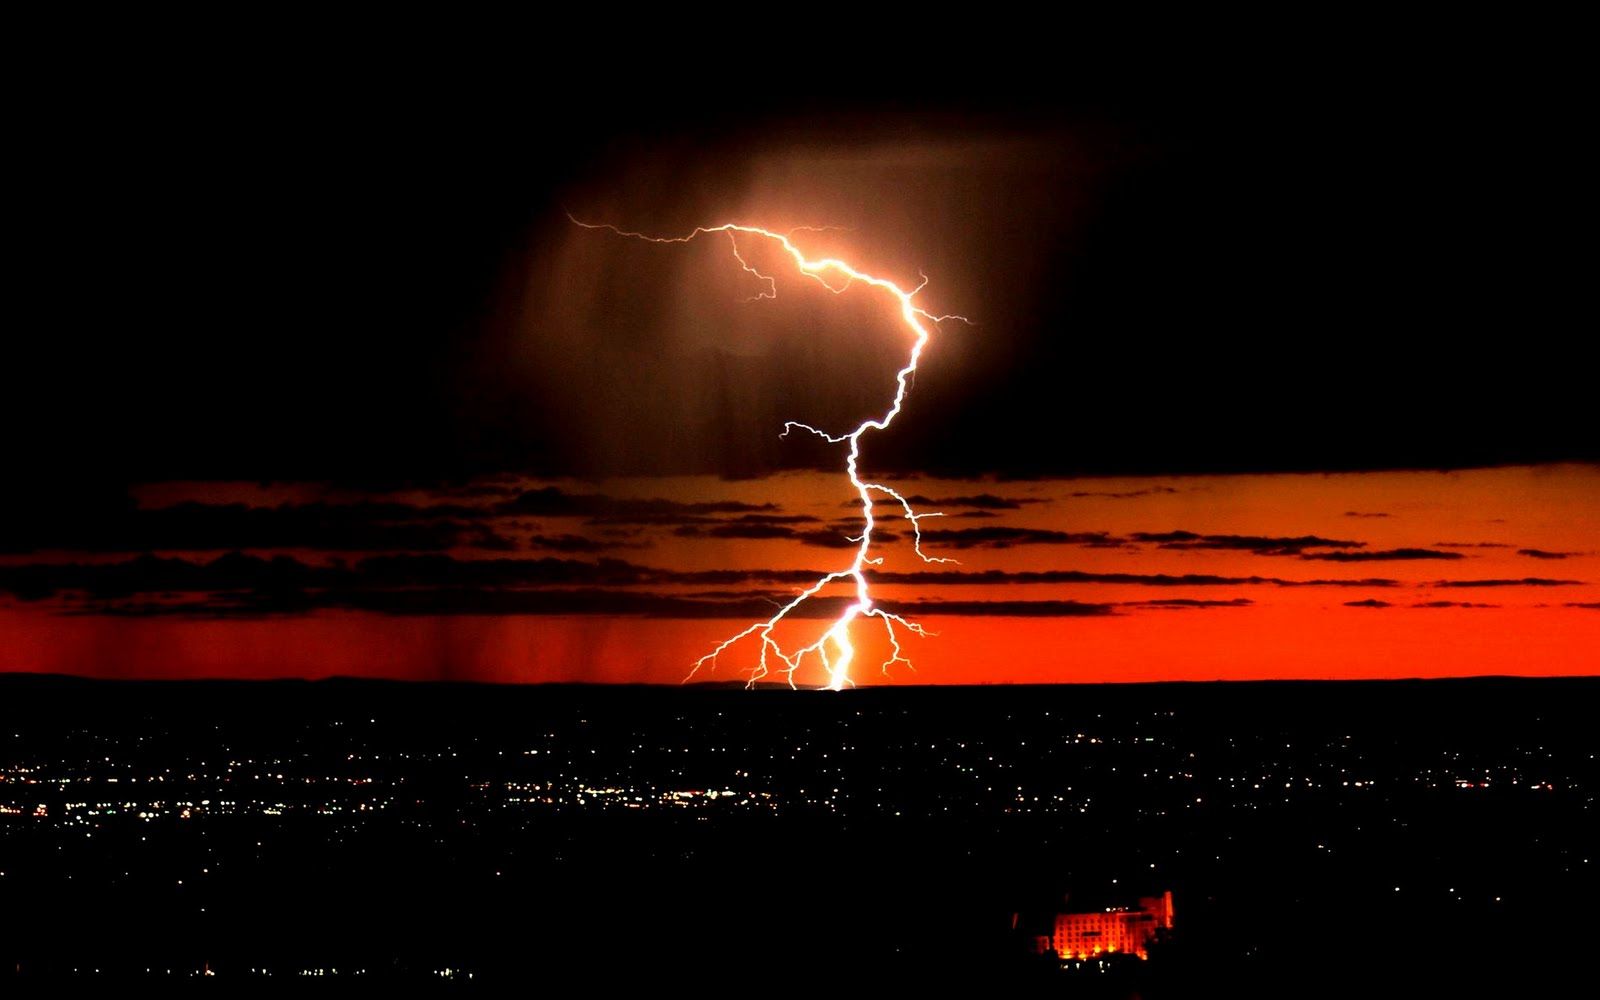 Red Lightning Wallpapers Hd. landscapes nature storm darkness city